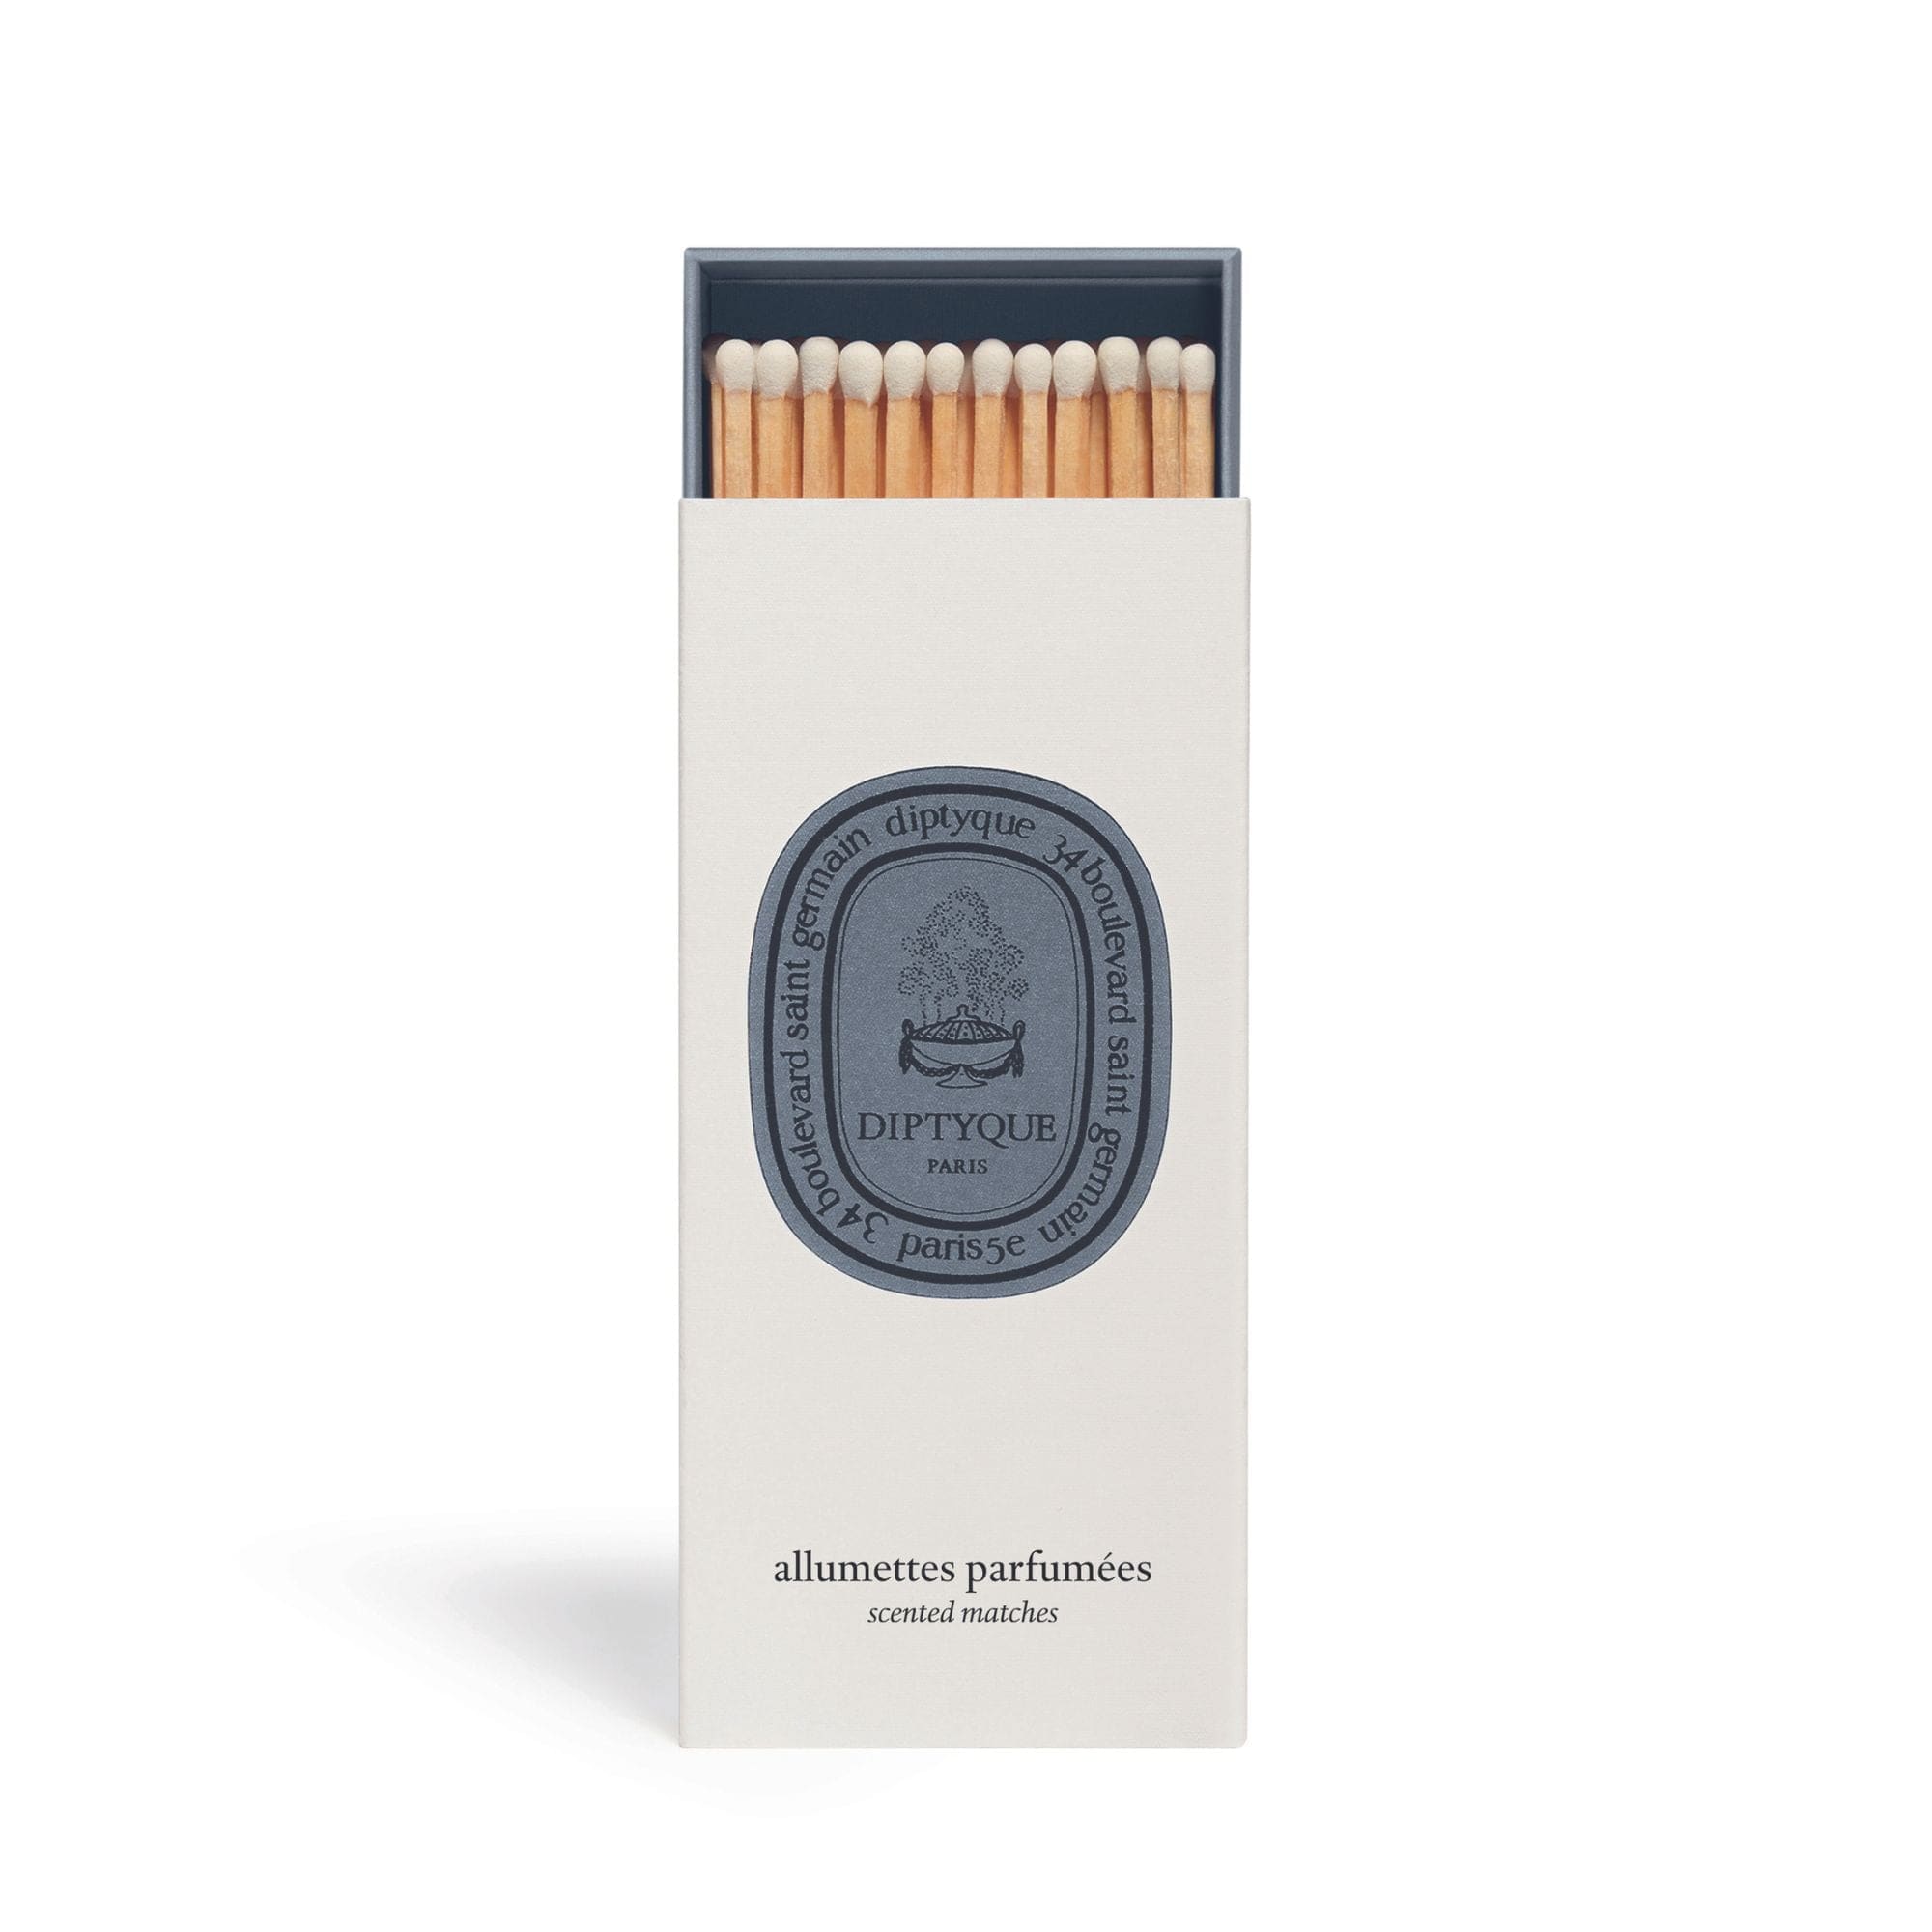 Scented Matches Nymphes Merveilles Diptyque Scented matches